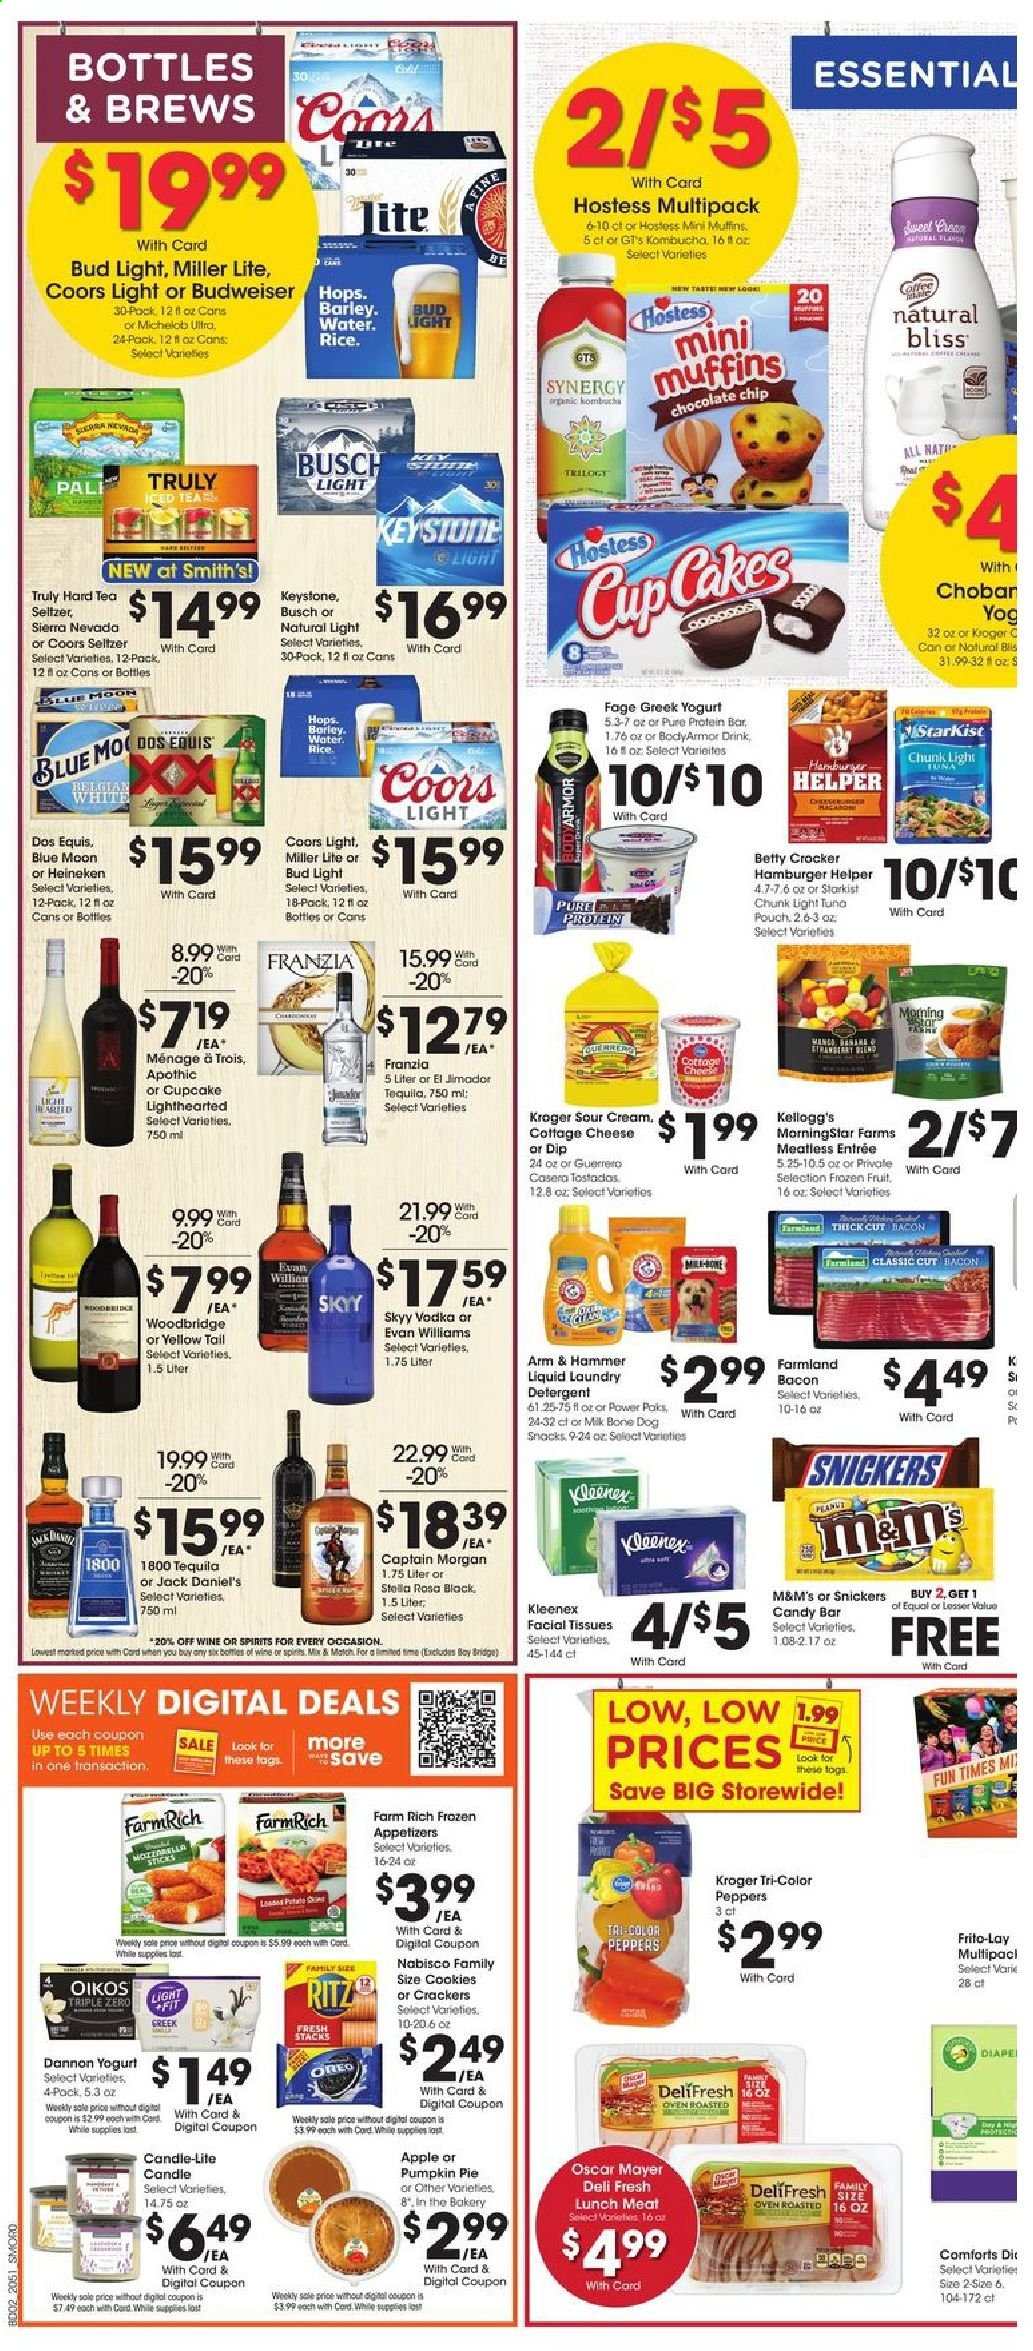 thumbnail - Smith's Flyer - 01/20/2021 - 01/26/2021 - Sales products - tostadas, pie, muffin, StarKist, Jack Daniel's, MorningStar Farms, bacon, Oscar Mayer, lunch meat, cottage cheese, greek yoghurt, Oreo, yoghurt, Oikos, Dannon, milk, sour cream, dip, cookies, Snickers, M&M's, crackers, Kellogg's, RITZ, Smith's, Frito-Lay, ARM & HAMMER, protein bar, seltzer water, kombucha, tea, wine, Woodbridge, Captain Morgan, tequila, vodka, SKYY, TRULY, beer, Budweiser, Miller Lite, Coors, Dos Equis, Blue Moon, Michelob, Busch, Bud Light, Heineken, Keystone, Kleenex, tissues, detergent, laundry detergent, facial tissues, cup, candle. Page 4.